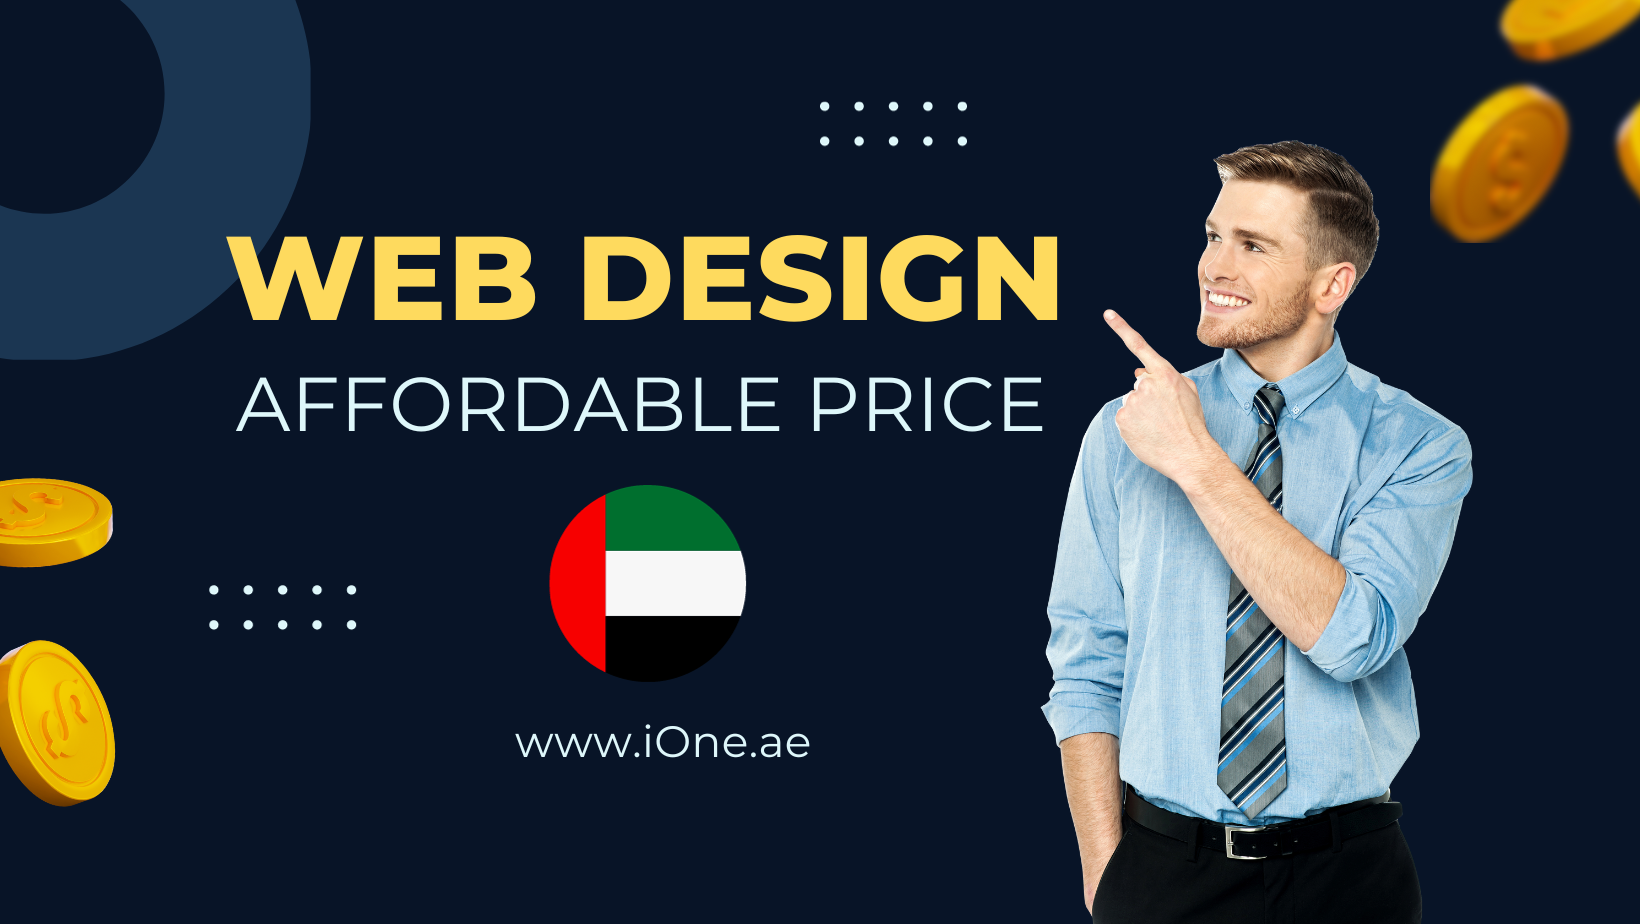 Website Design Affordable Price and Low Cost : Website Design Price in Dubai : Understanding Website Design Prices in Dubai UAE : How Much Does A Website Design Cost in Dubai?